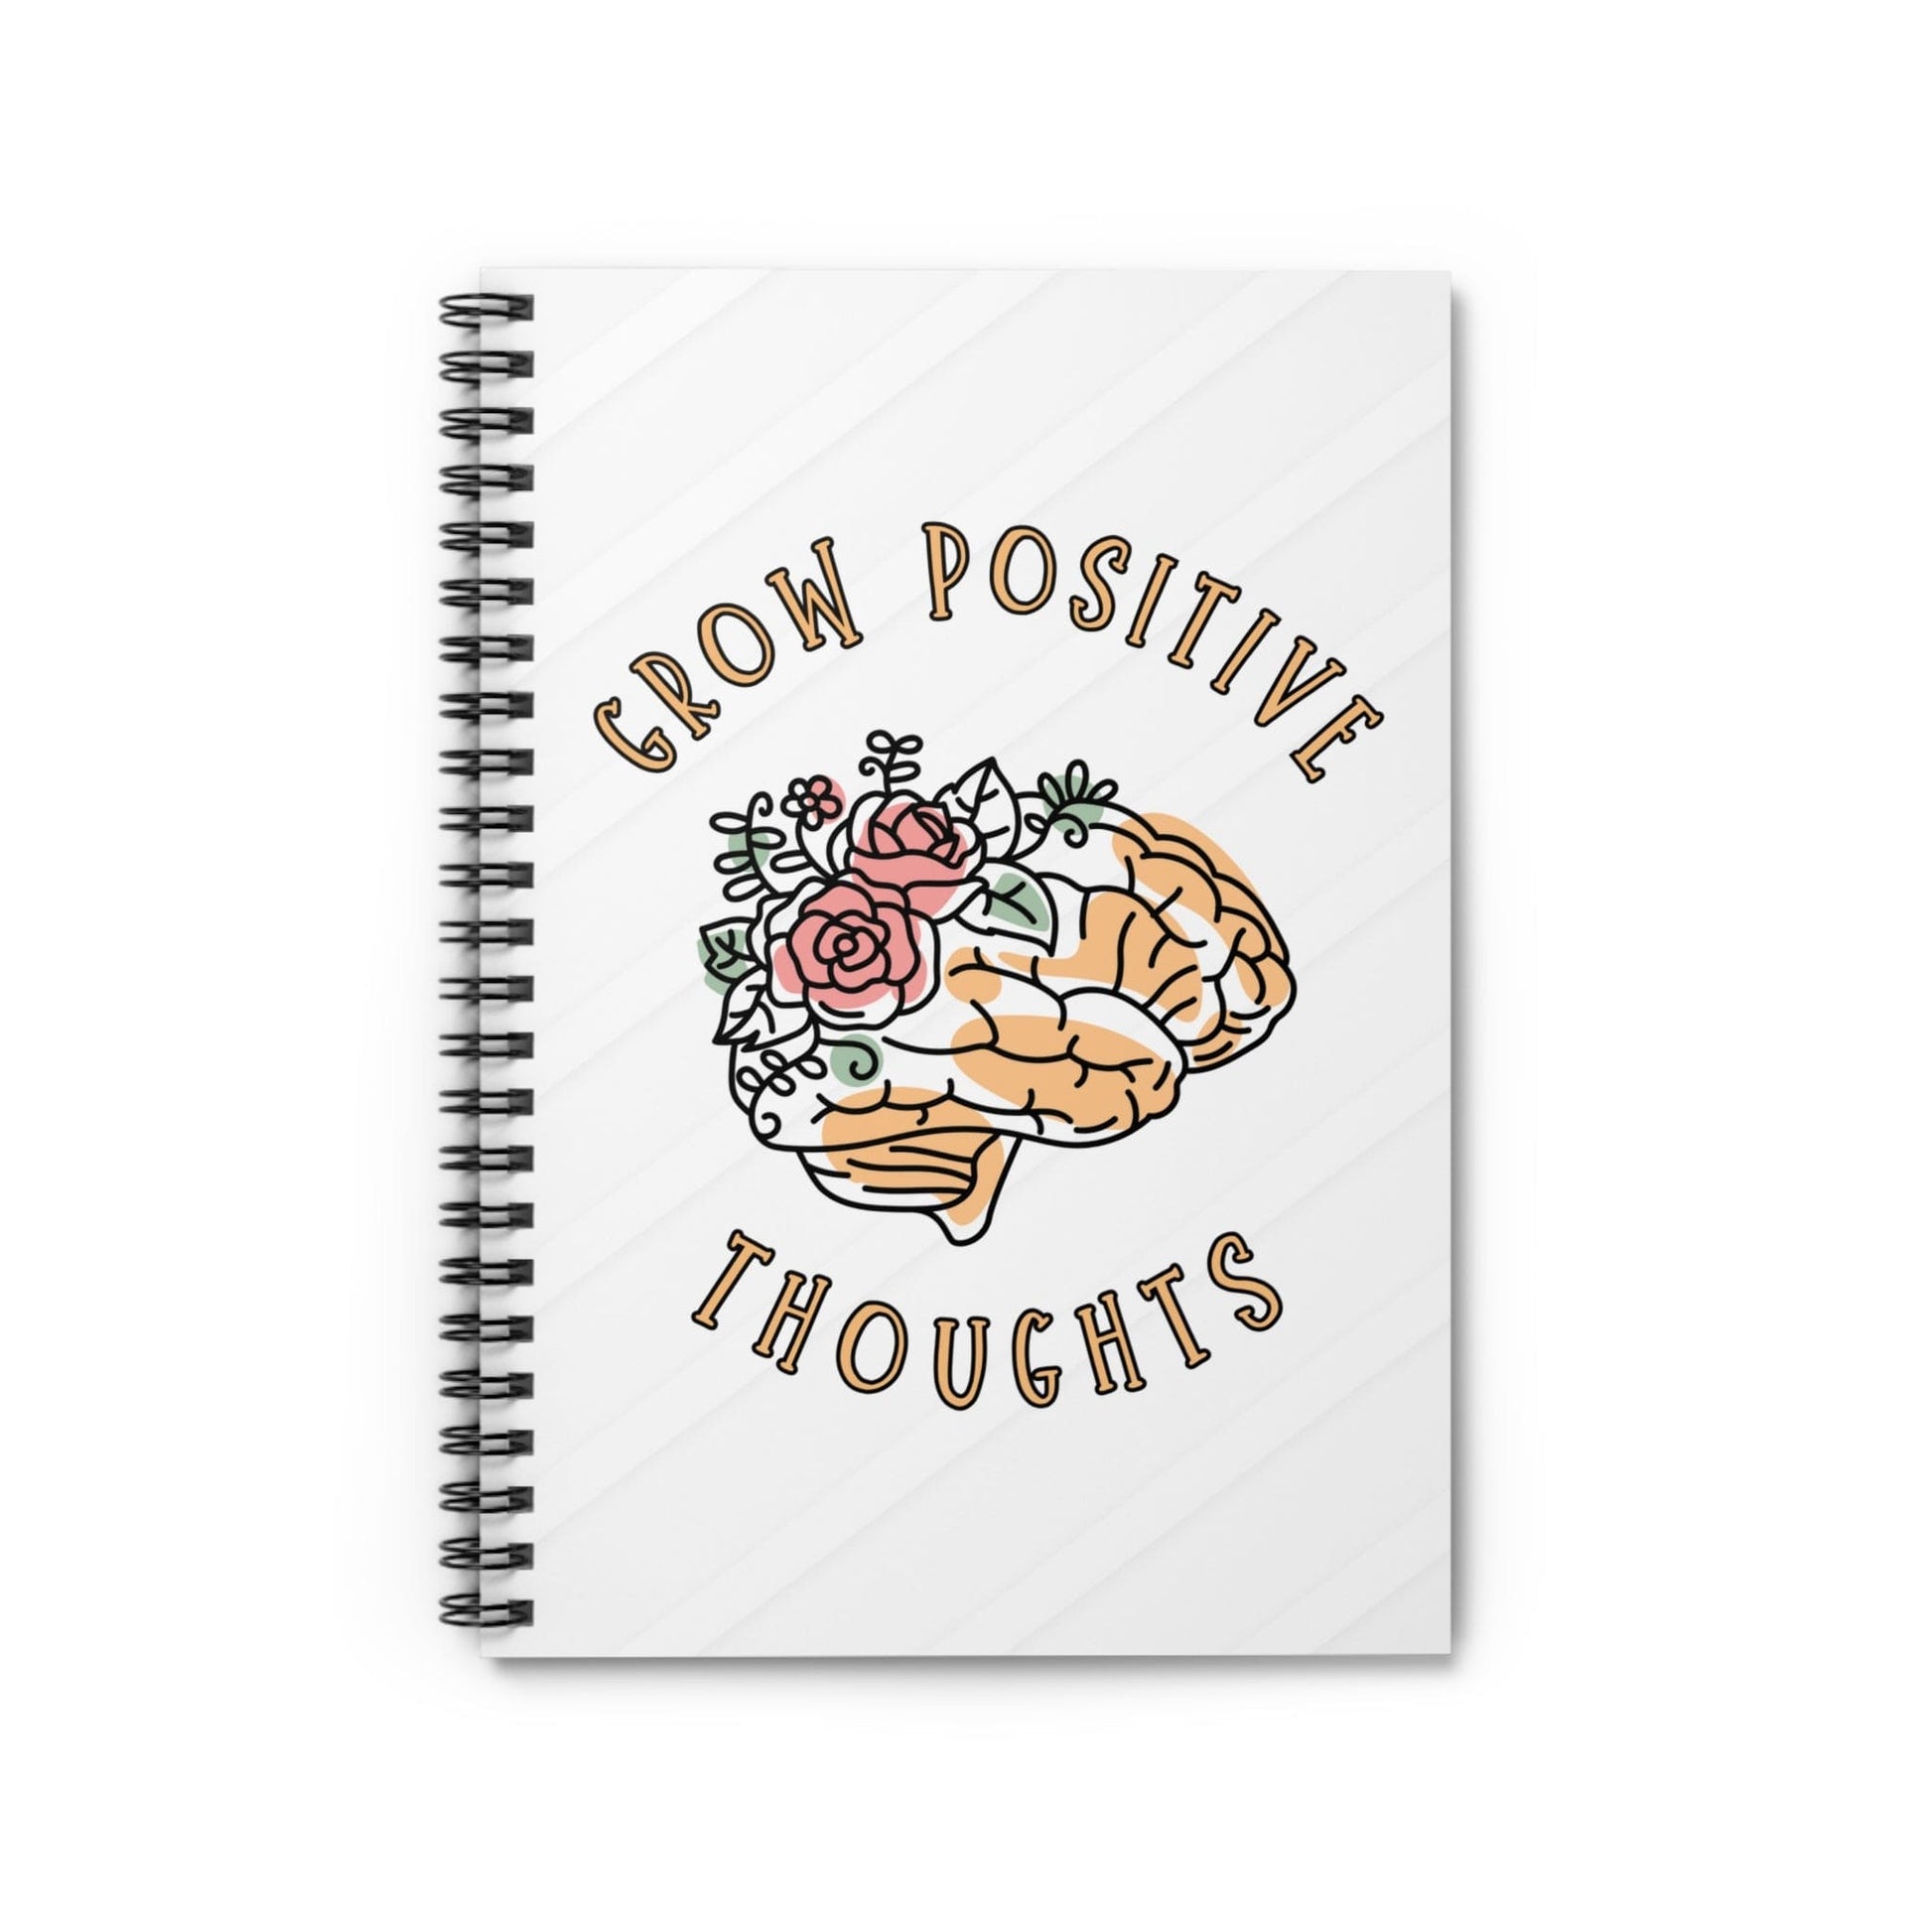 Spiral One Size Grow Positive Thoughts